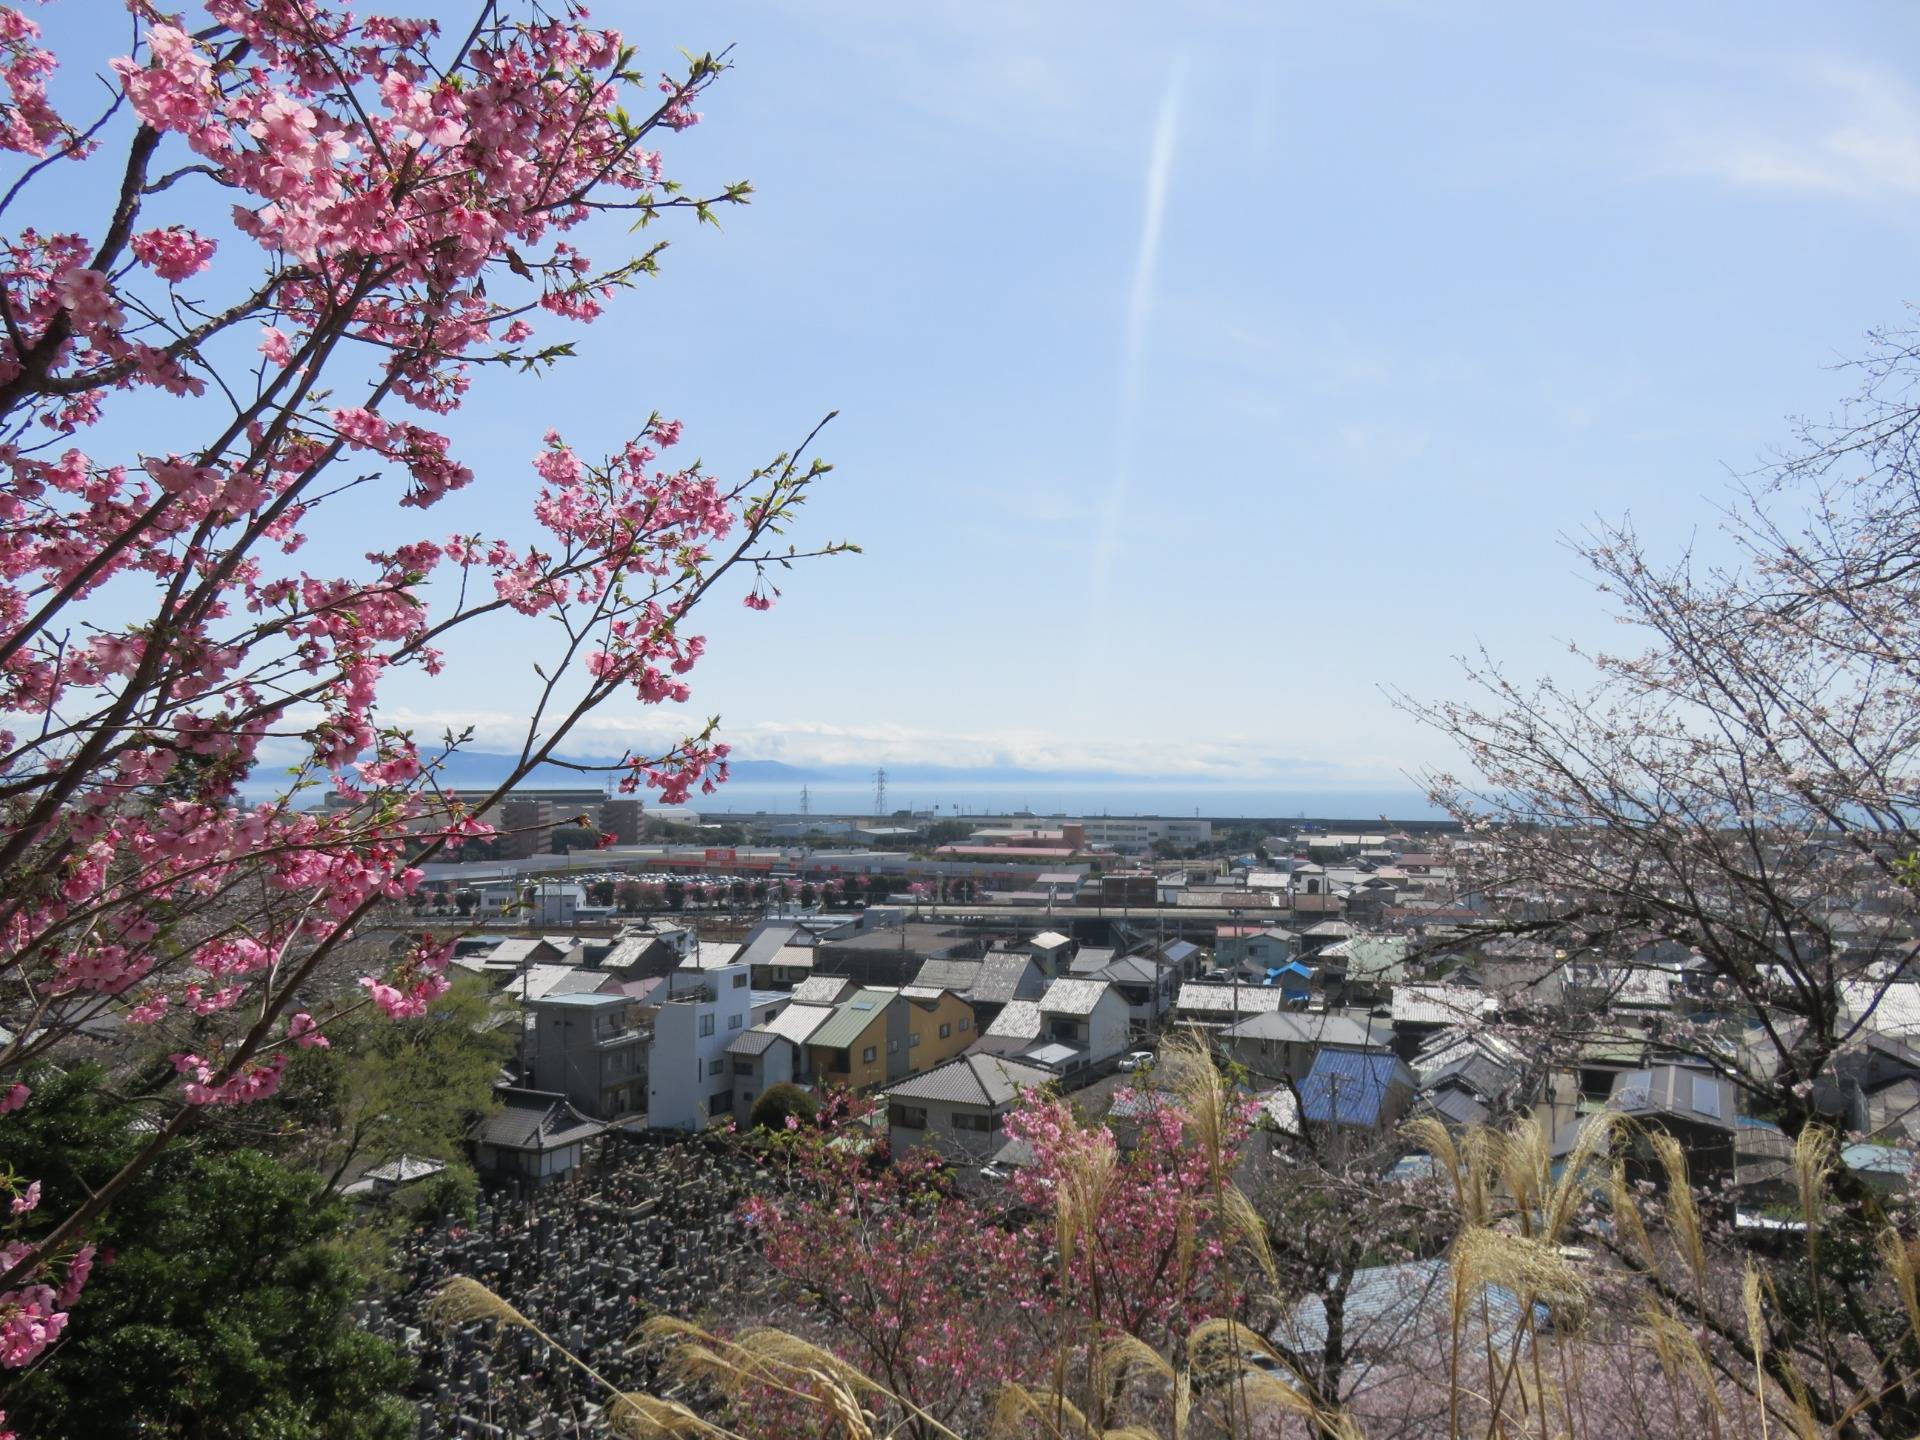 The park above the shrine is dotted with cherry trees and views looking across to the Izu peninsula.